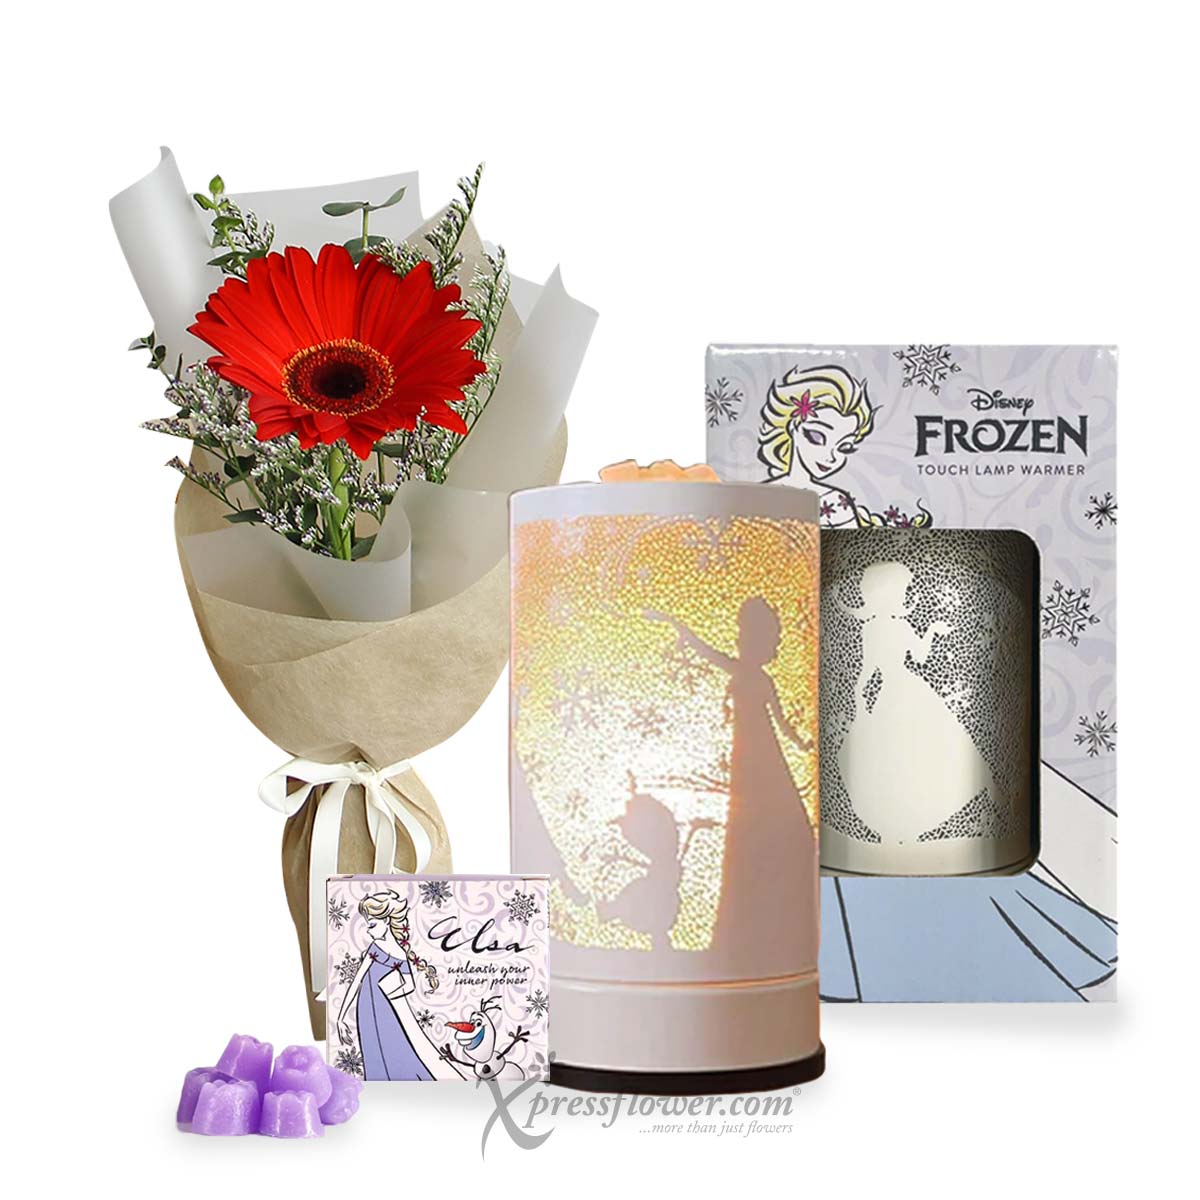 Immense Devotion (1 Red Gerbera with Disney Touch Warmer and Candle Bundle)